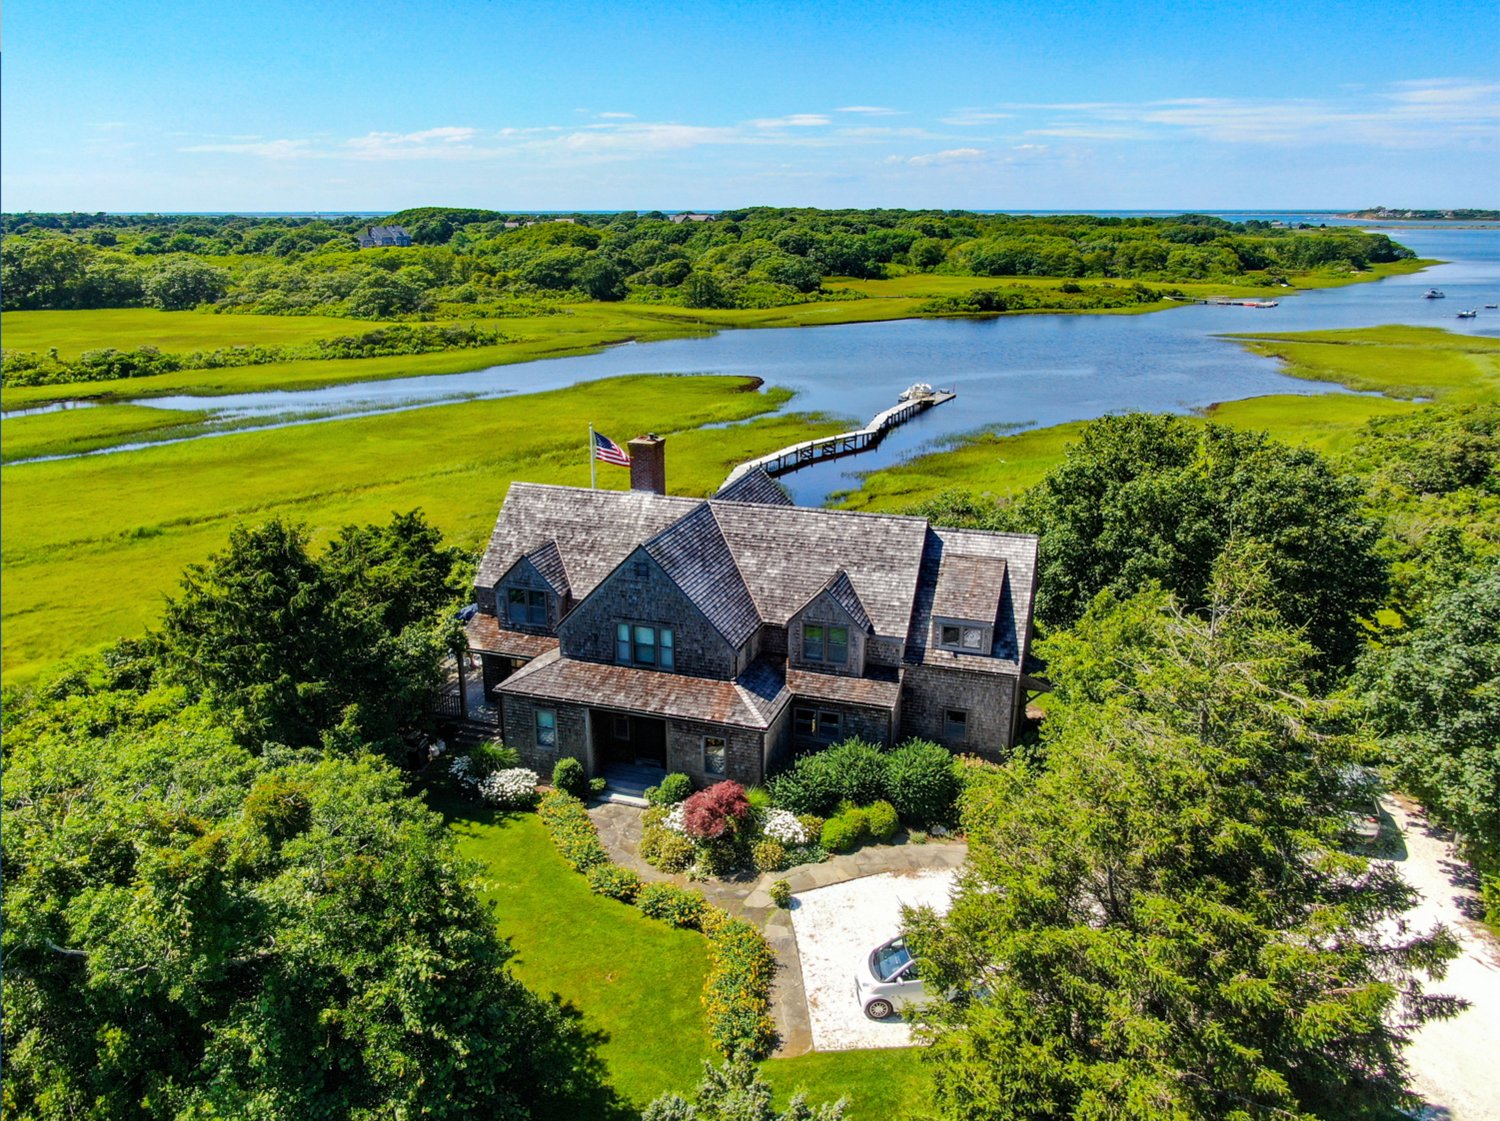 Located on 7.2 acres of picturesque land off Polpis Road, this four-bedroom, four-and-a-half-bathroom home has pristine water views.